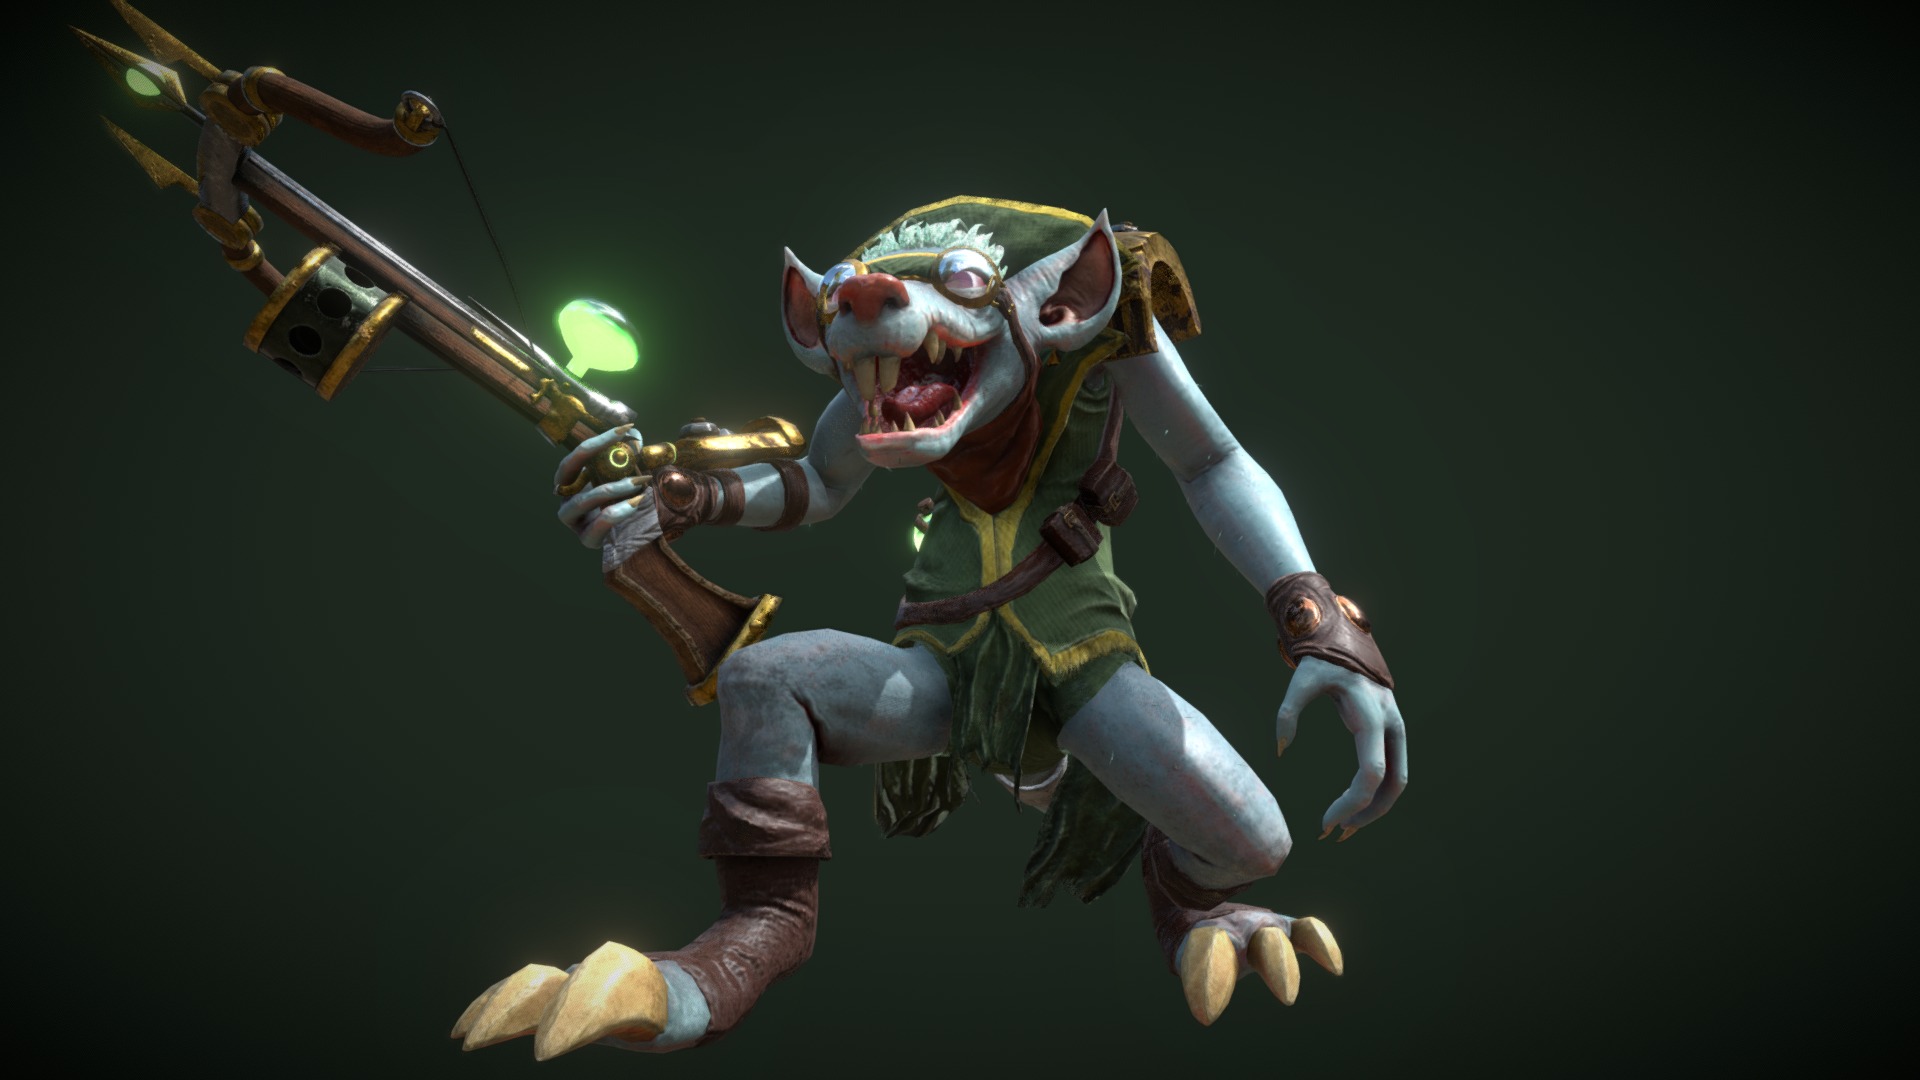 I had started this character for a Riot contest a few month ago and never had the time to finish it.
I have now finally finished my design for Twitch from the game League of Legends.
Modeling in Zbrush and 3dsmax, texturing in Substance Painter and Photoshop.
I will make another version of this character, this time as a still image rendered in Keyshot.
Hope you like it 3d model